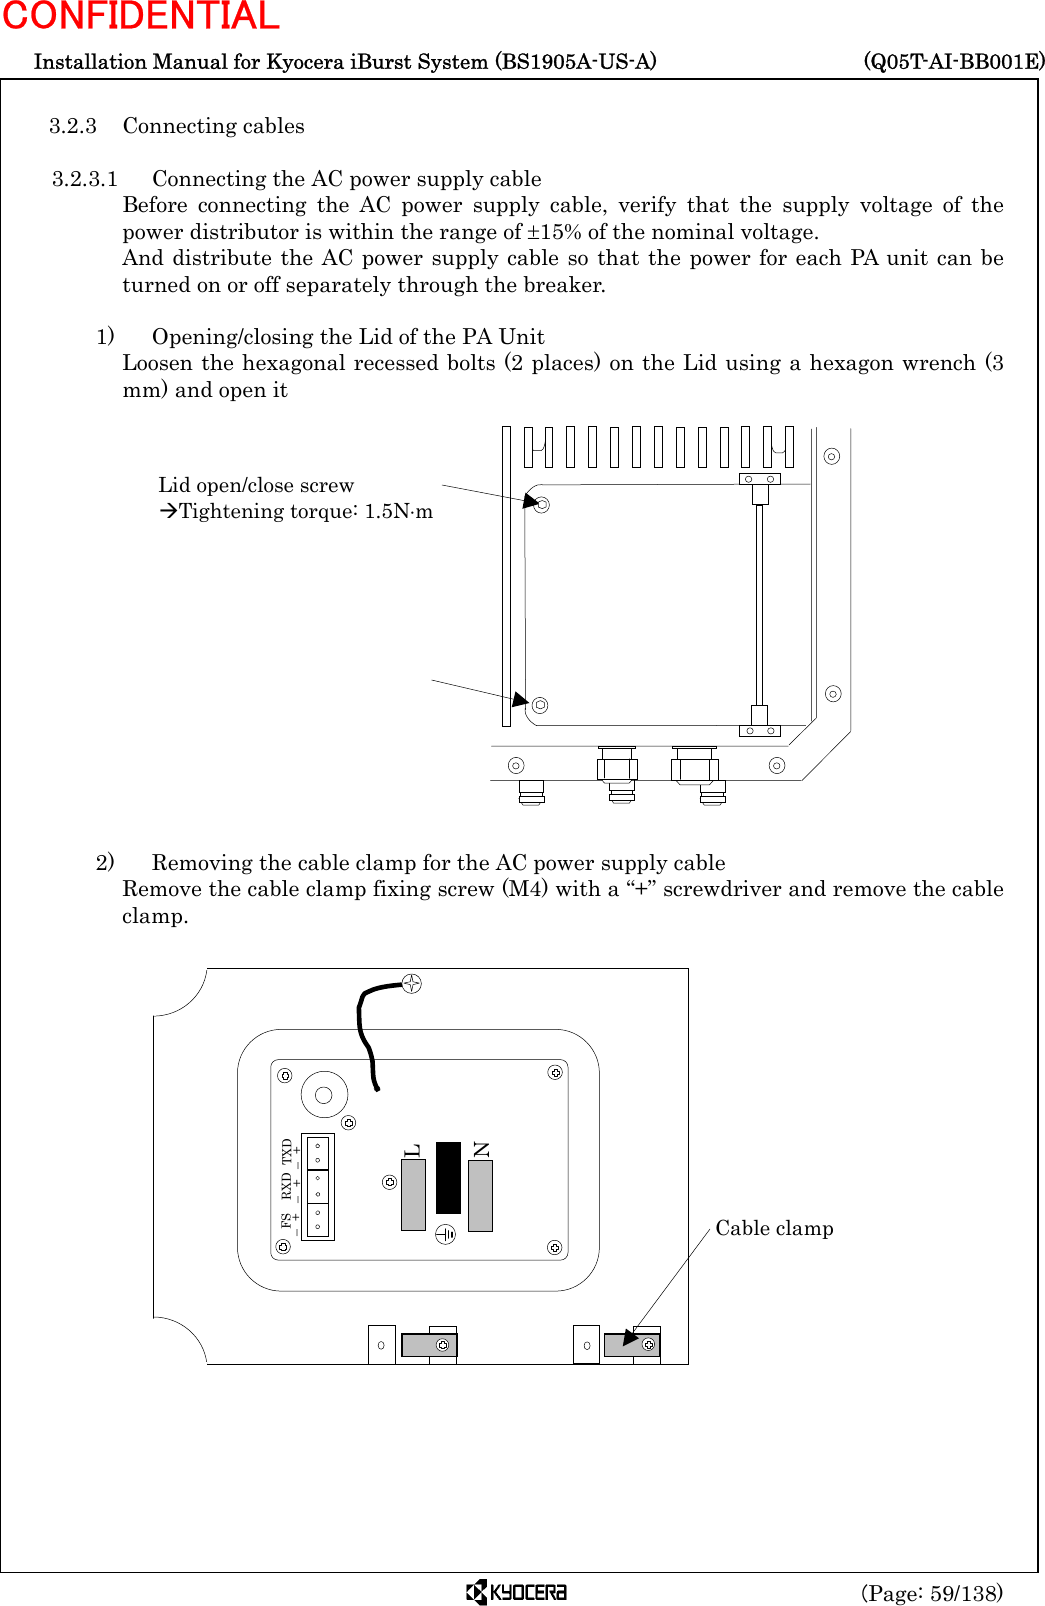  Installation Manual for Kyocera iBurst System (BS1905A-US-A)     (Q05T-AI-BB001E) (Page: 59/138) CONFIDENTIAL  3.2.3 Connecting cables  3.2.3.1  Connecting the AC power supply cable Before connecting the AC power supply cable, verify that the supply voltage of the power distributor is within the range of ±15% of the nominal voltage. And distribute the AC power supply cable so that the power for each PA unit can be turned on or off separately through the breaker.  1)    Opening/closing the Lid of the PA Unit   Loosen the hexagonal recessed bolts (2 places) on the Lid using a hexagon wrench (3 mm) and open it                  2)    Removing the cable clamp for the AC power supply cable Remove the cable clamp fixing screw (M4) with a “+” screwdriver and remove the cable clamp.                     Lid open/close screw ÆTightening torque: 1.5N⋅m L N   FS – + RXD – +  TXD – + Cable clamp 